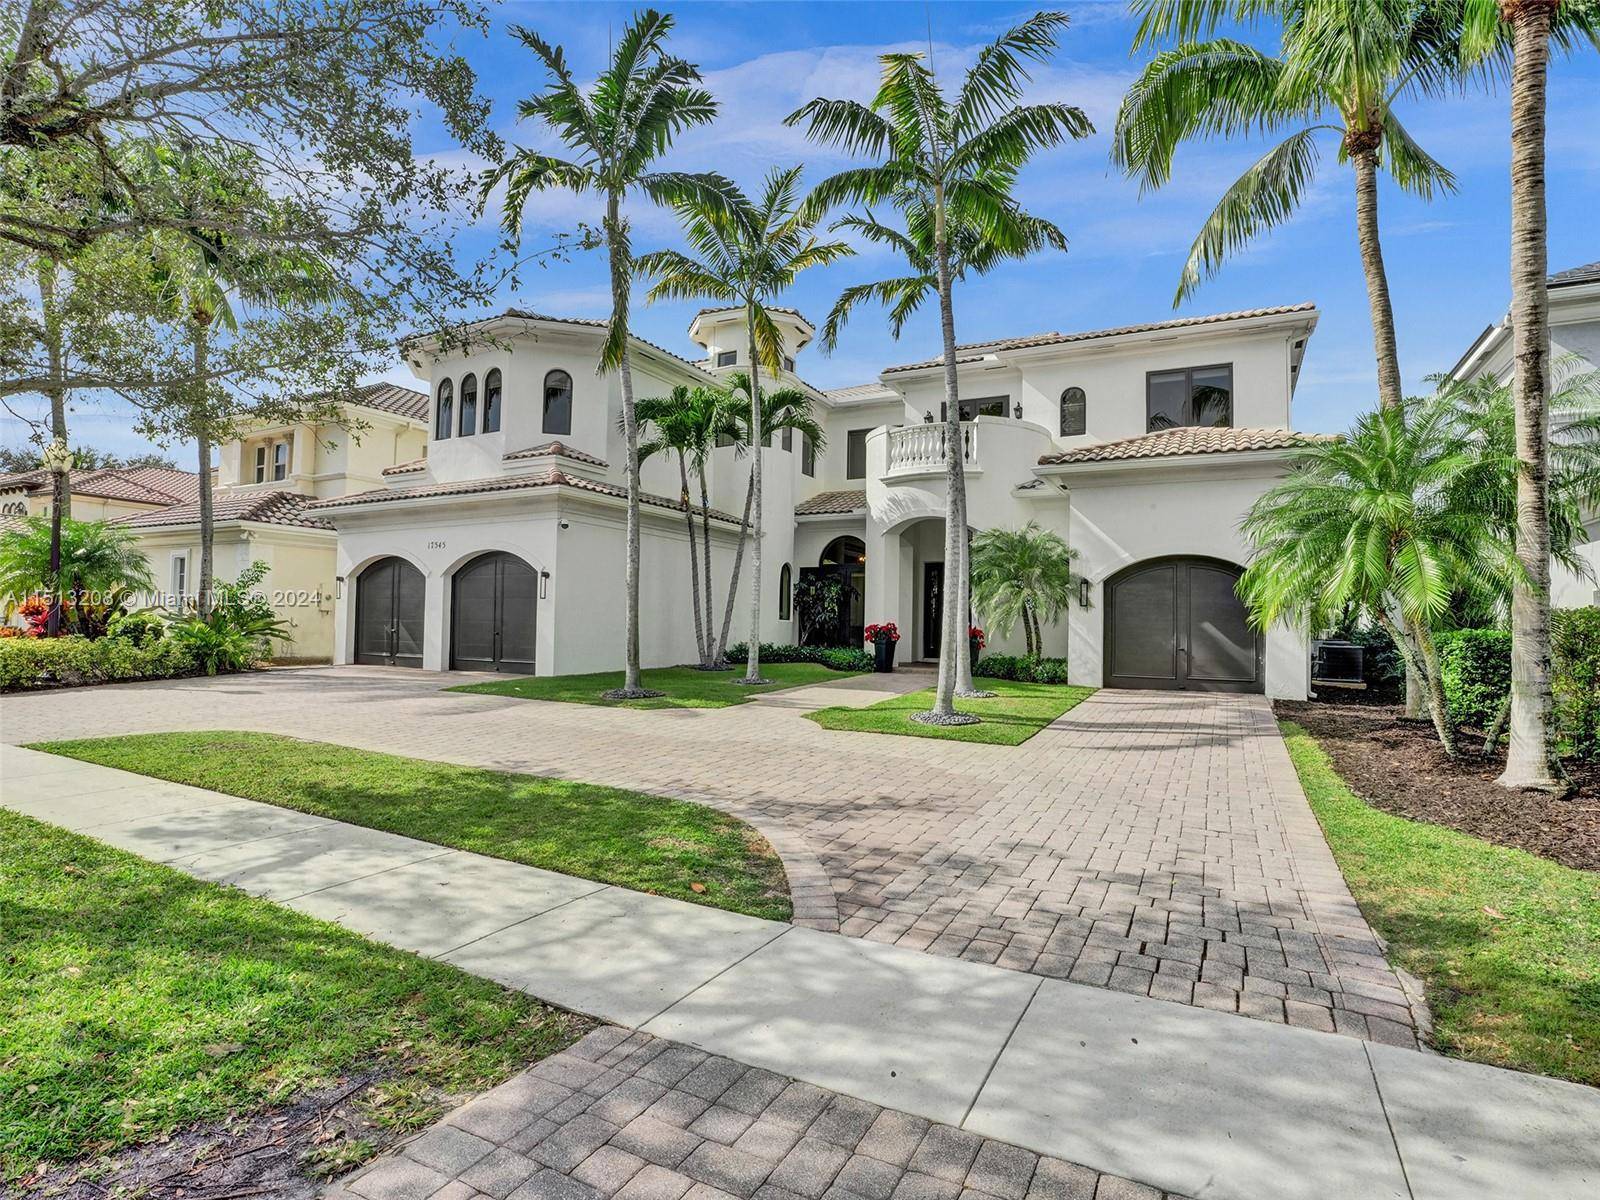 Luxurious Estate, nestled in exclusive The Oaks private community.